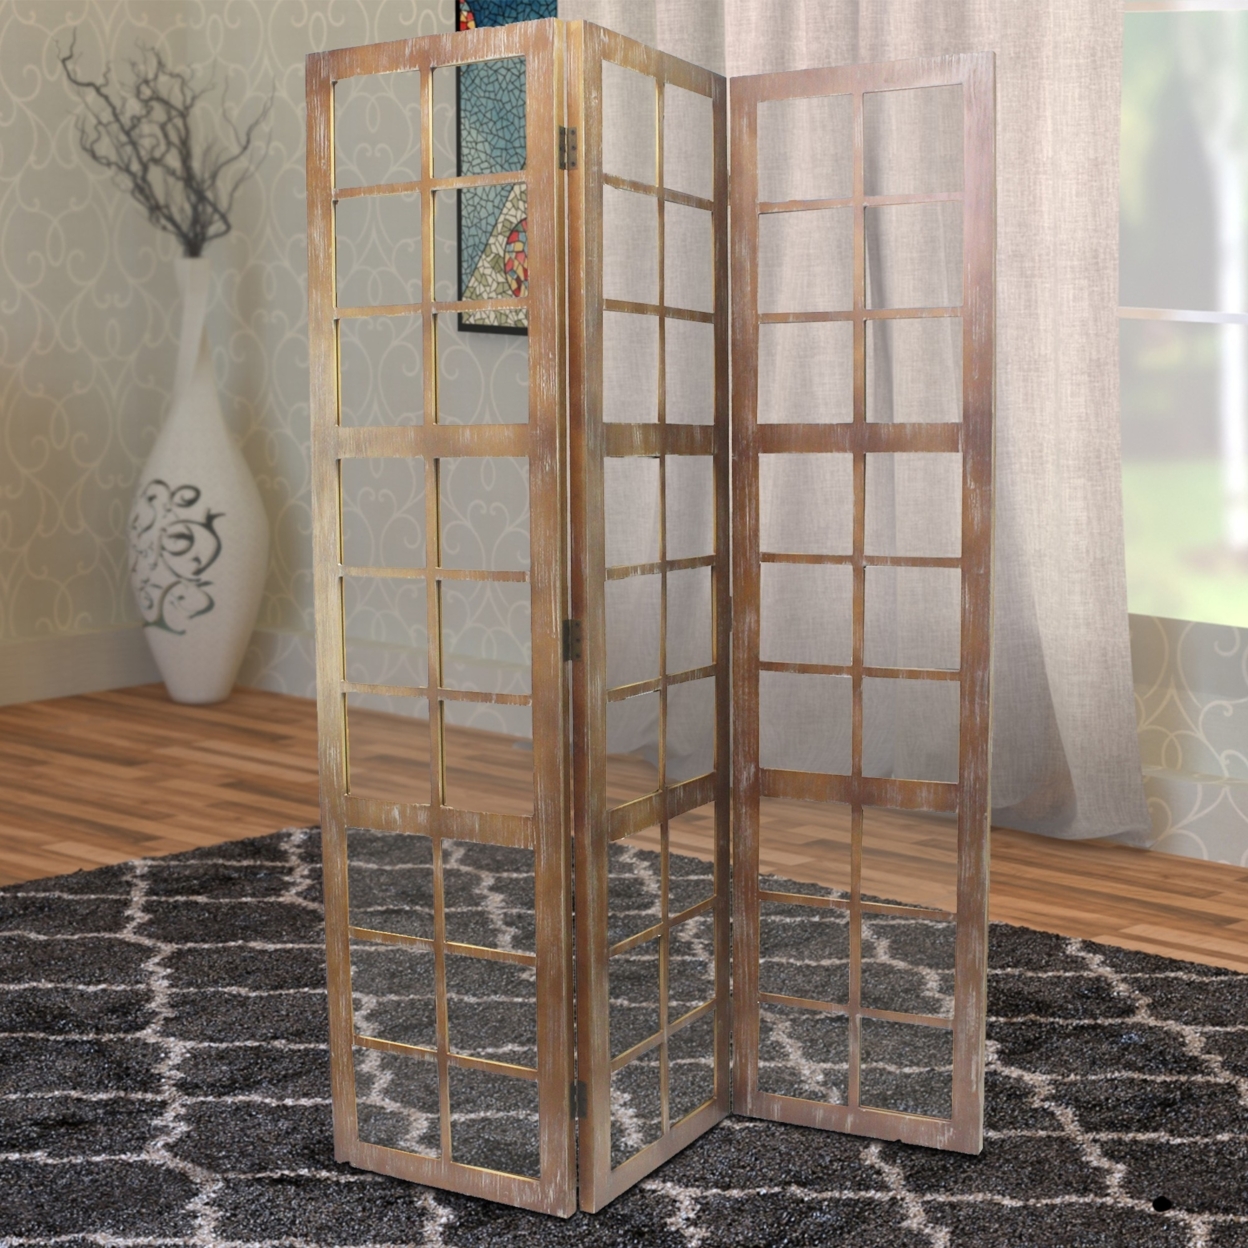 3 Panel Wooden Screen With Square Mirror Inserts, Brown And Silver- Saltoro Sherpi